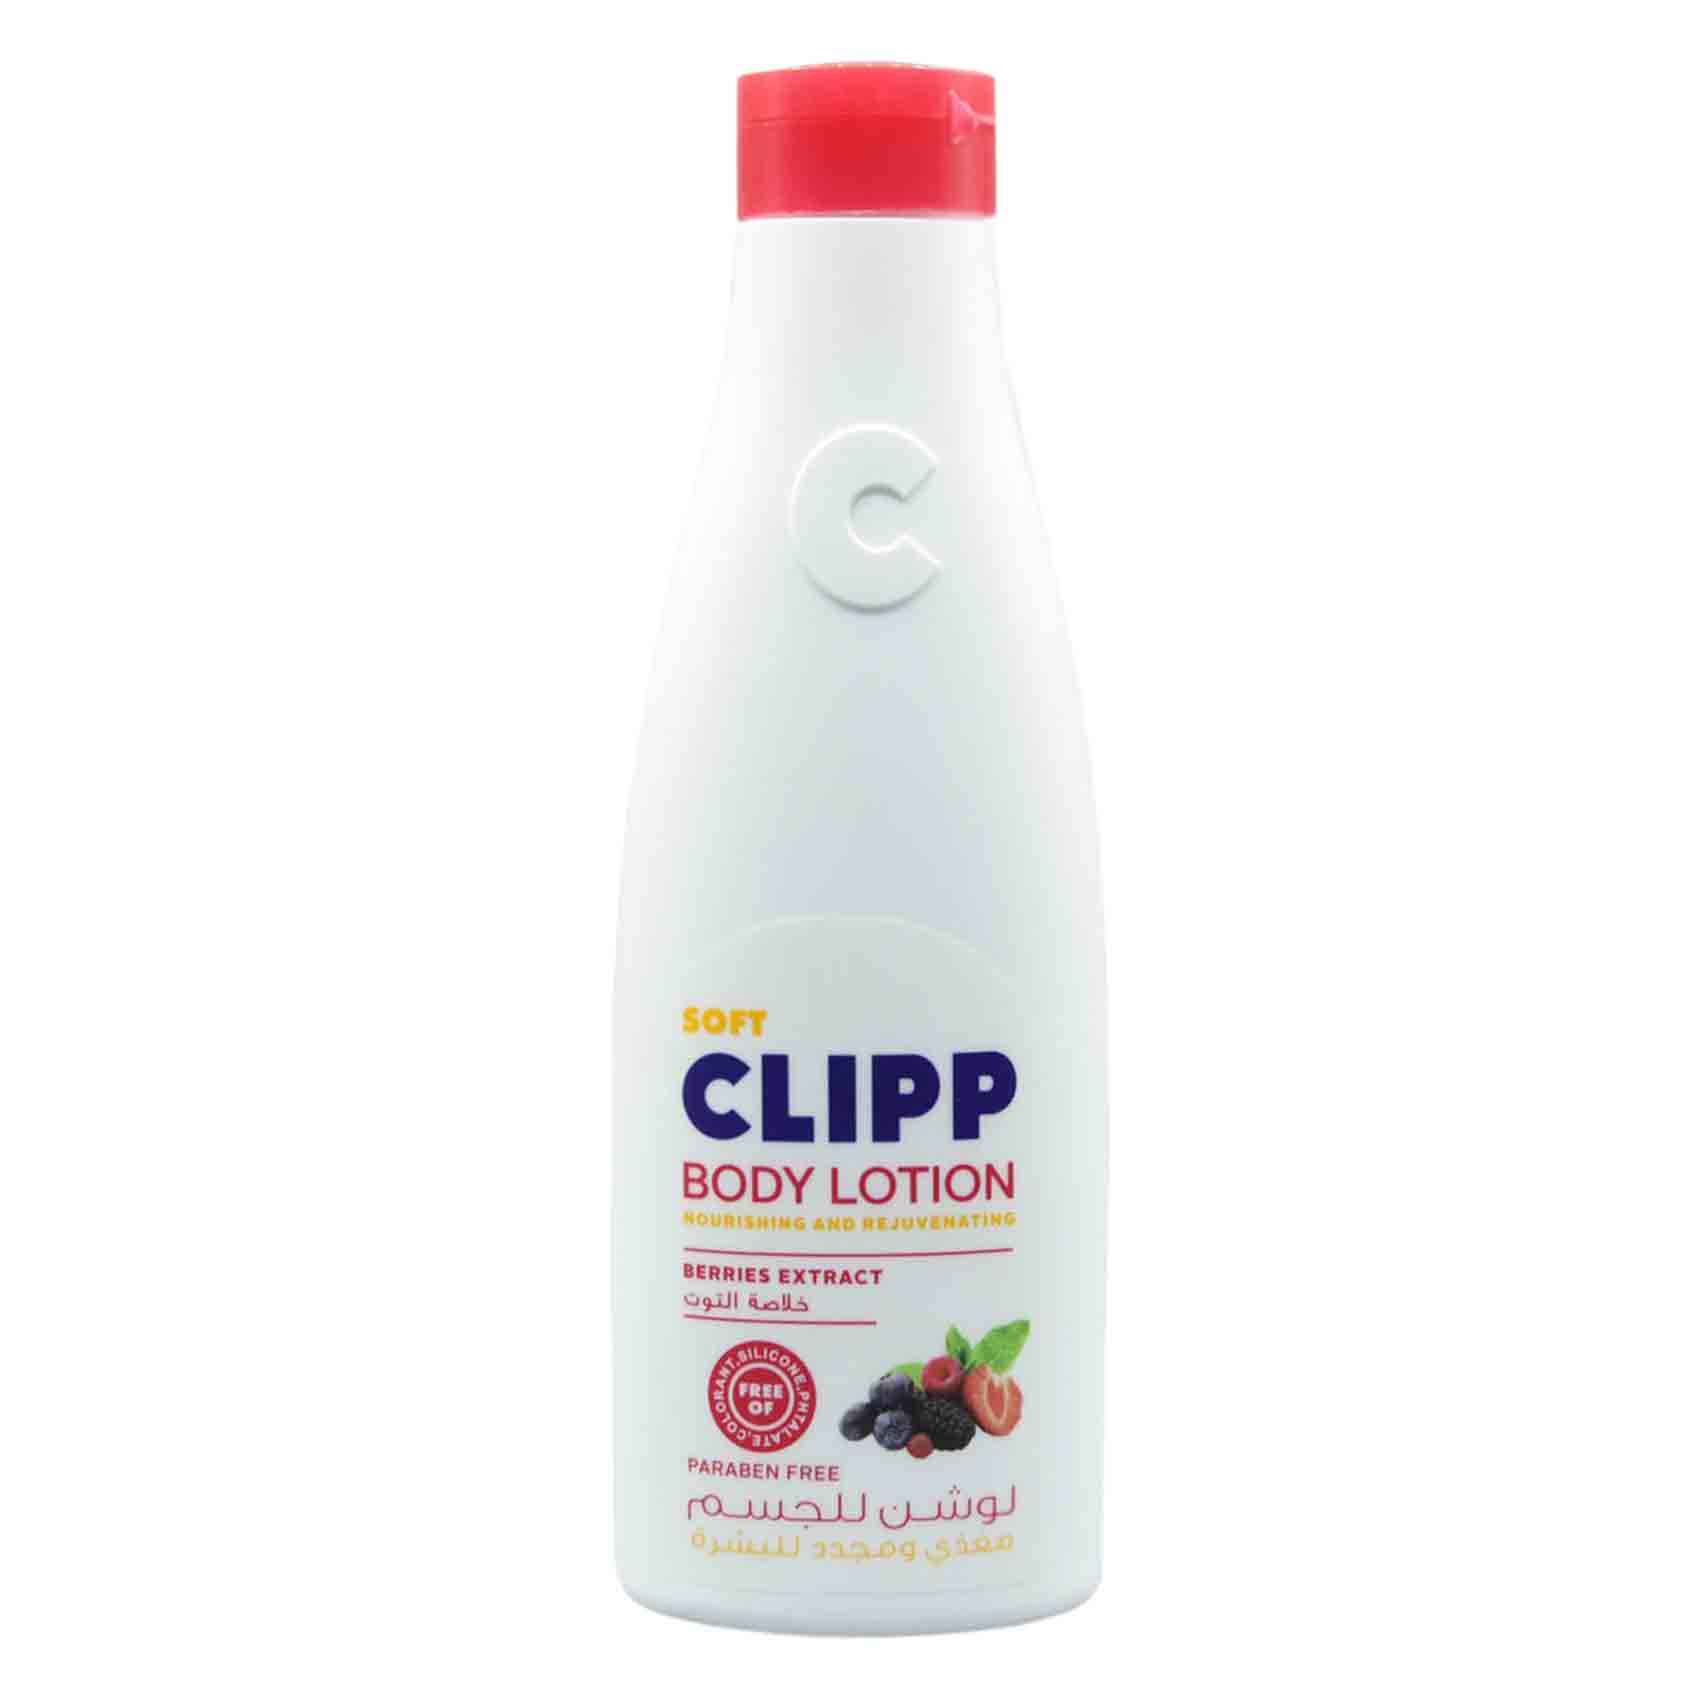 Clipp Berries Extract Nourishing And Rejuvenating Skin Body Lotion 400ML